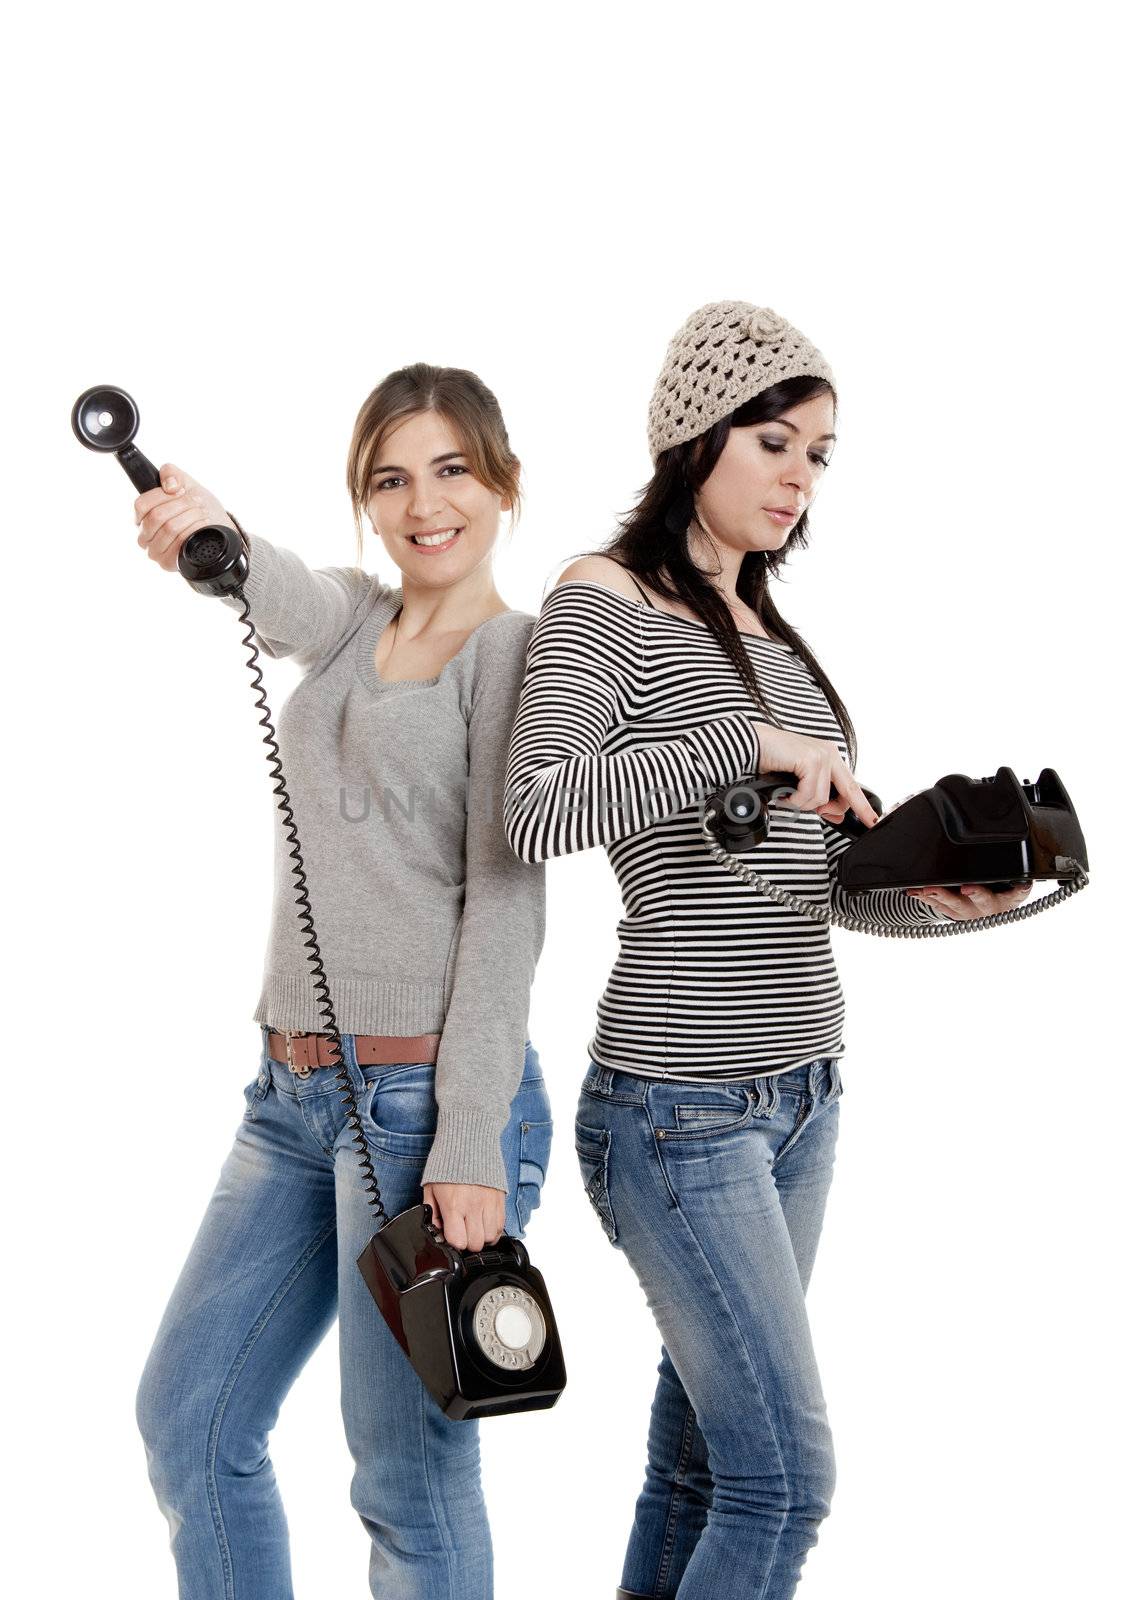 Two young women talking with old telephones - Isolated on white